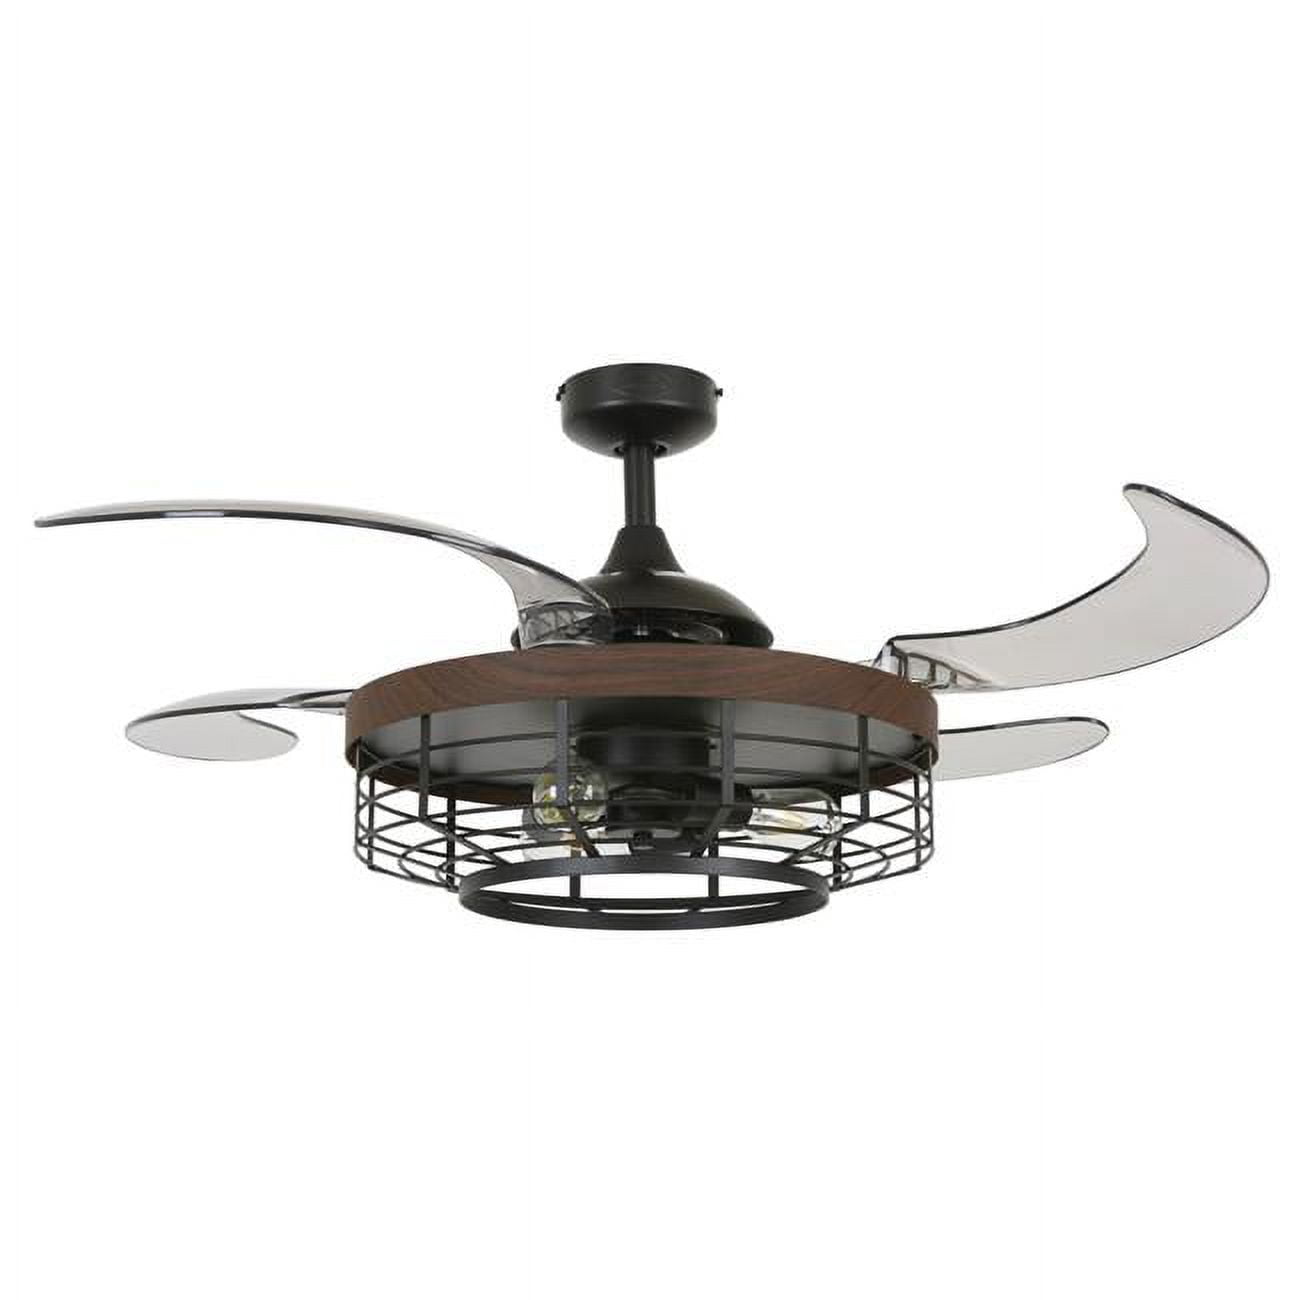 Picture of Fanaway 51106101 Montclair 48-inch Black with Koa Trim AC Ceiling Fan with Light